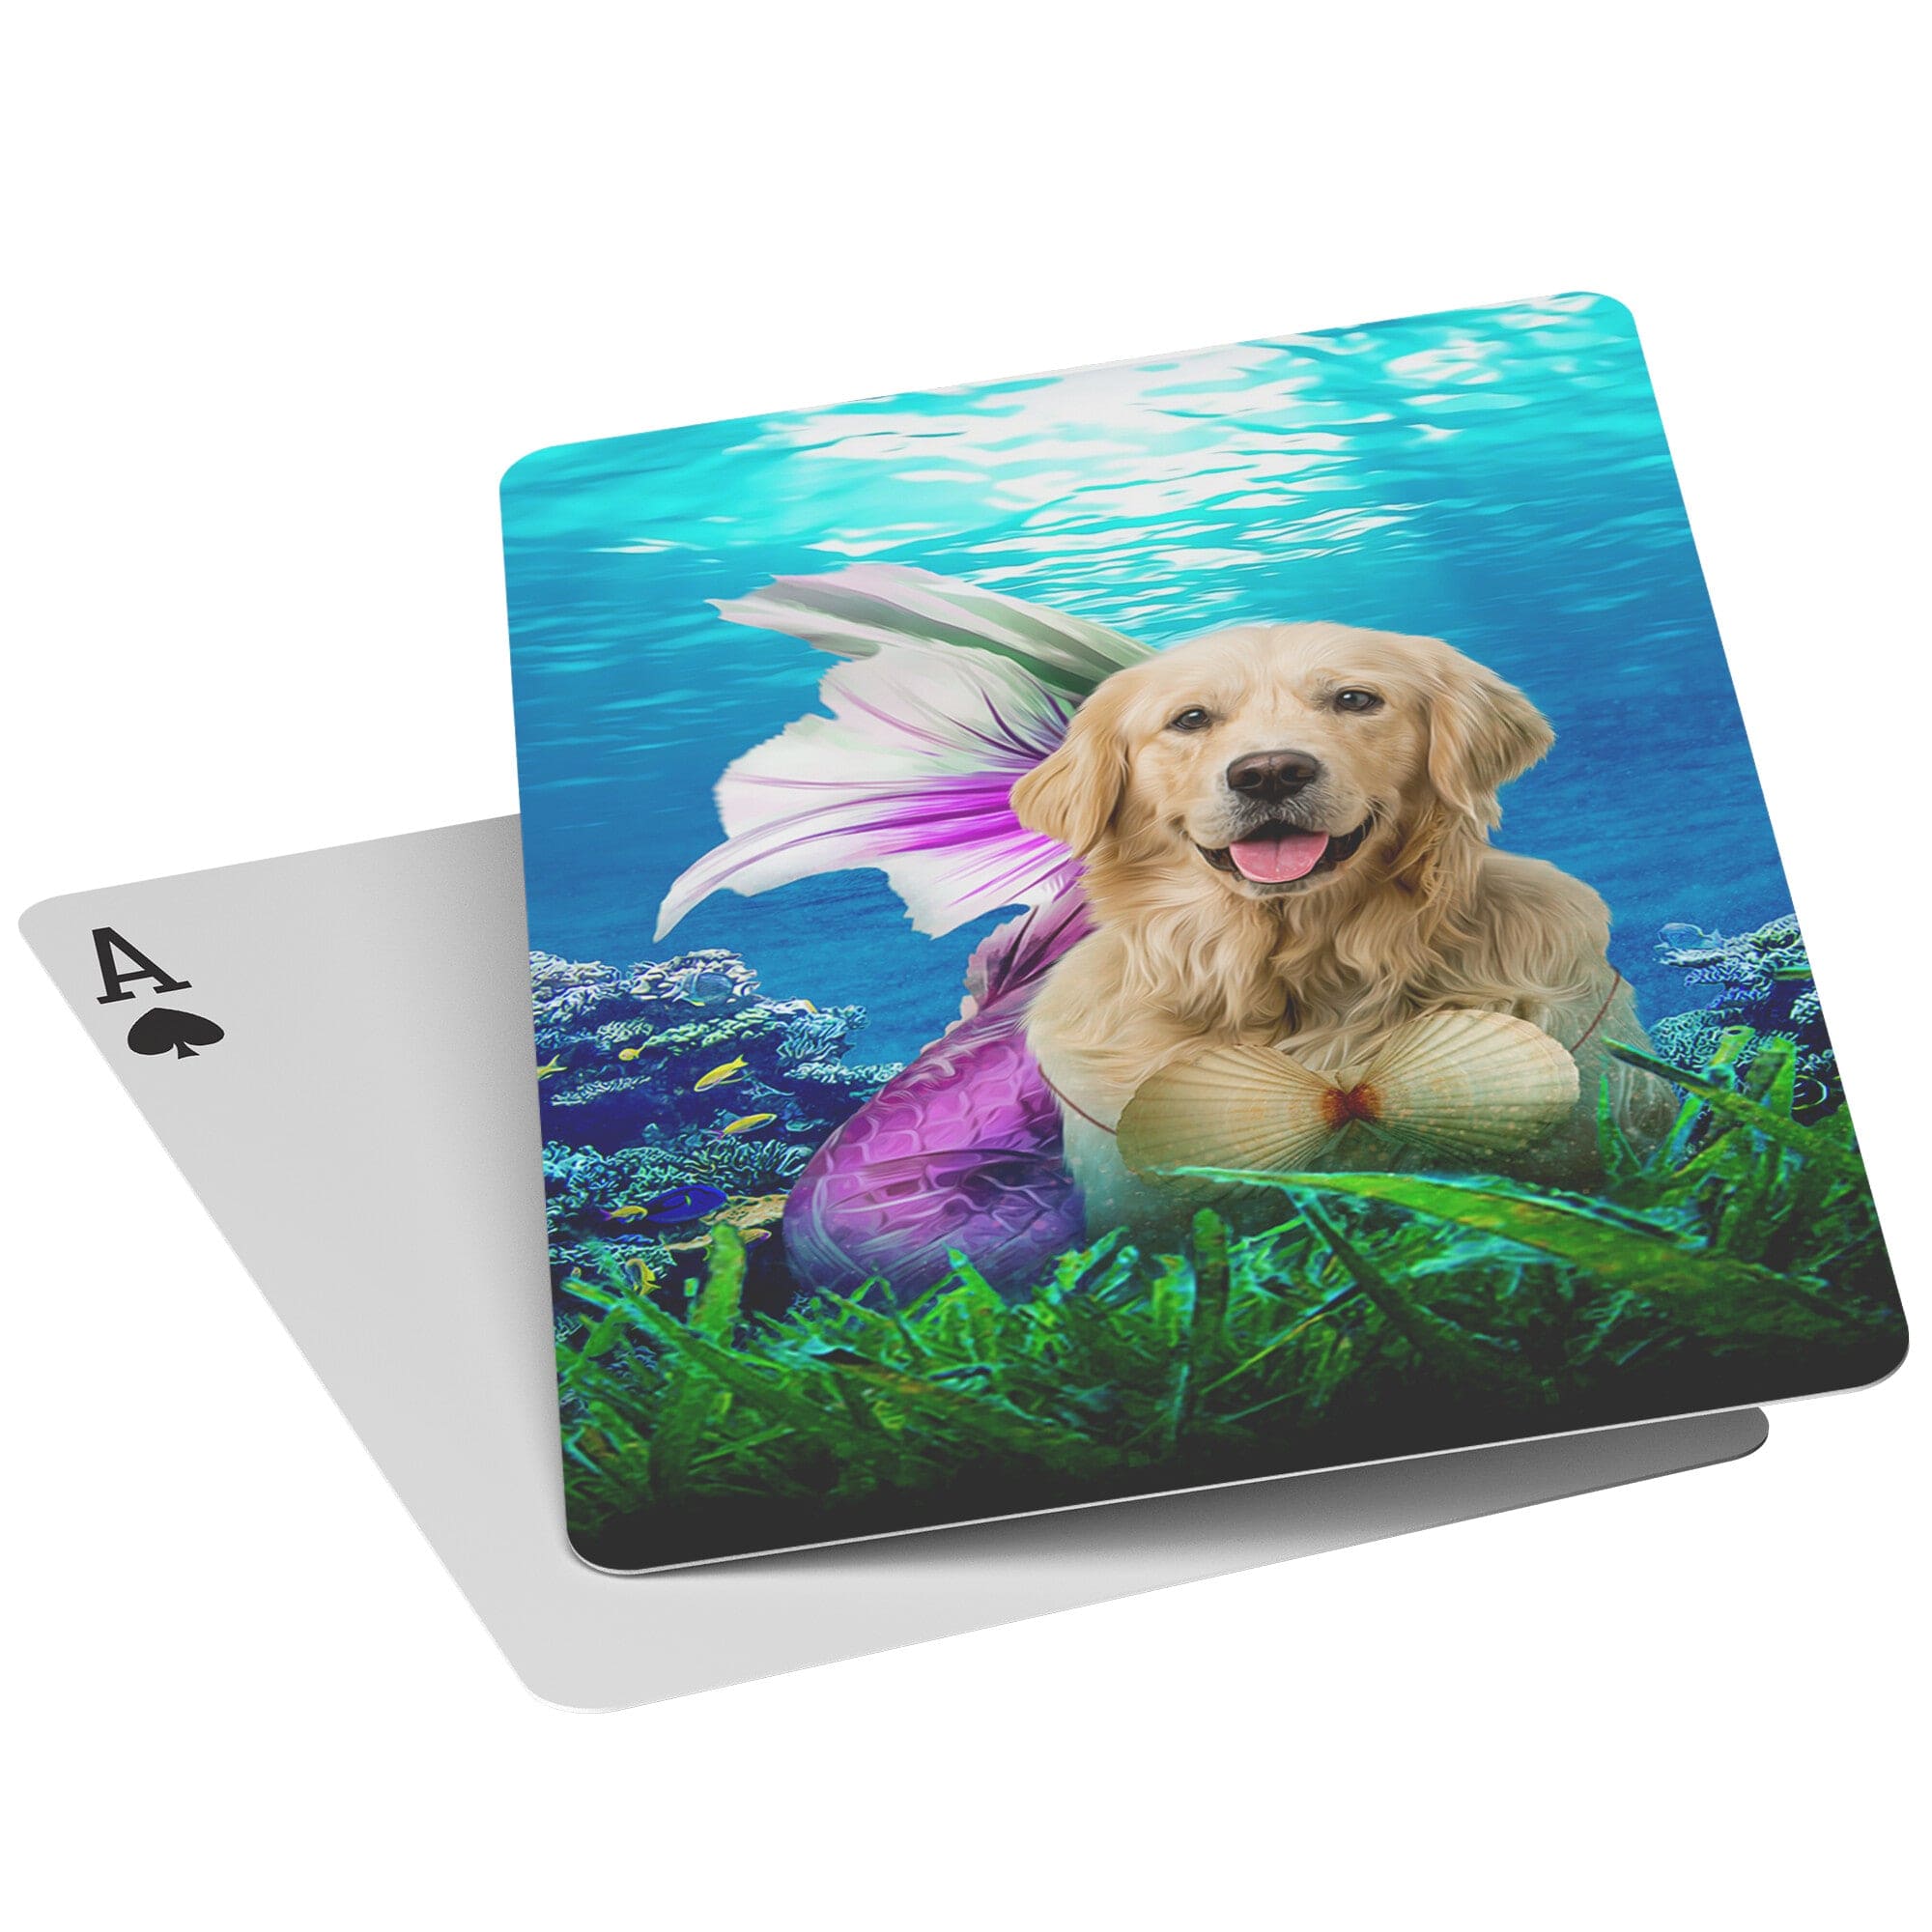 &#39;The Mermaid&#39; Personalized Pet Playing Cards